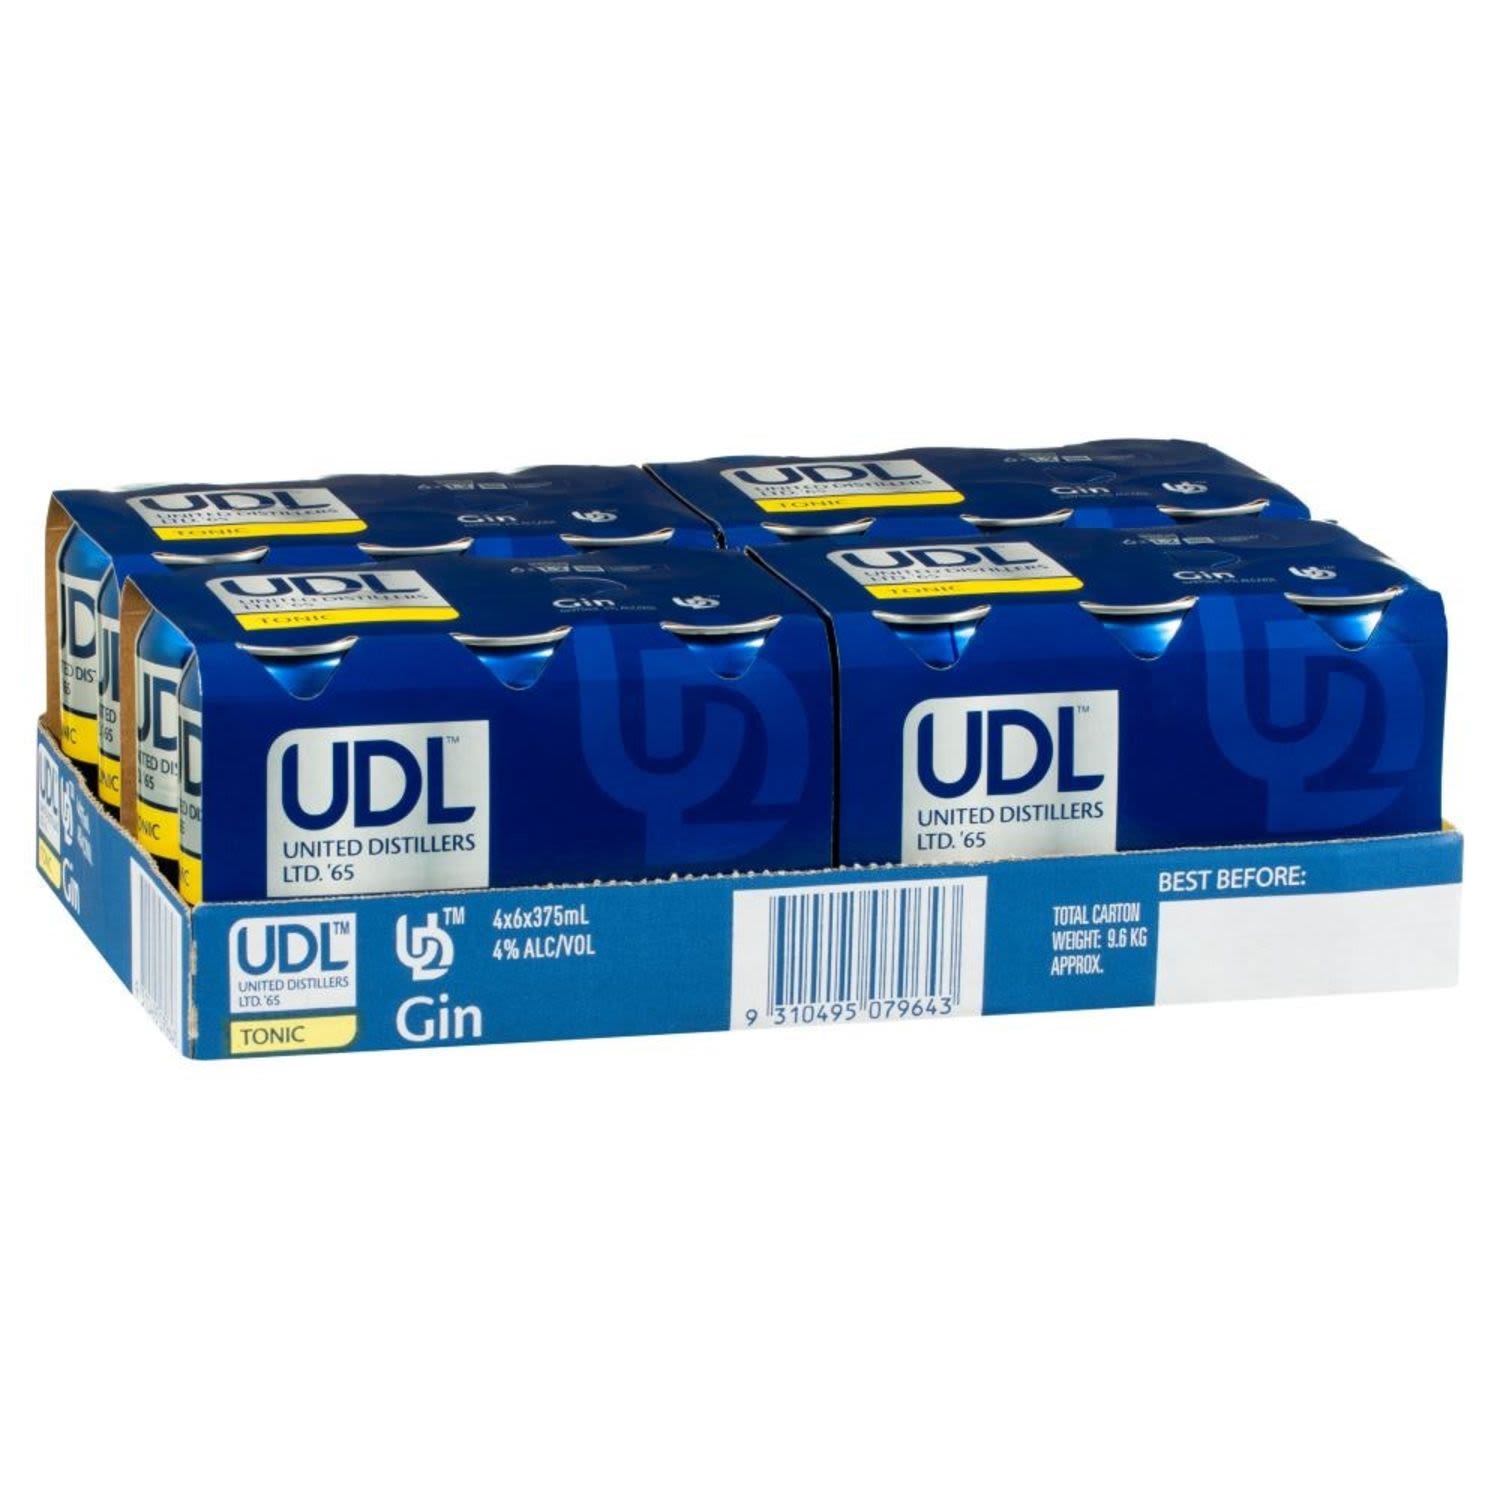 UDL Gin and Tonic Cans 375mL<br /> <br />Alcohol Volume: 4.00%<br /><br />Pack Format: 24 Pack<br /><br />Standard Drinks: 1.2</br /><br />Pack Type: Can<br />